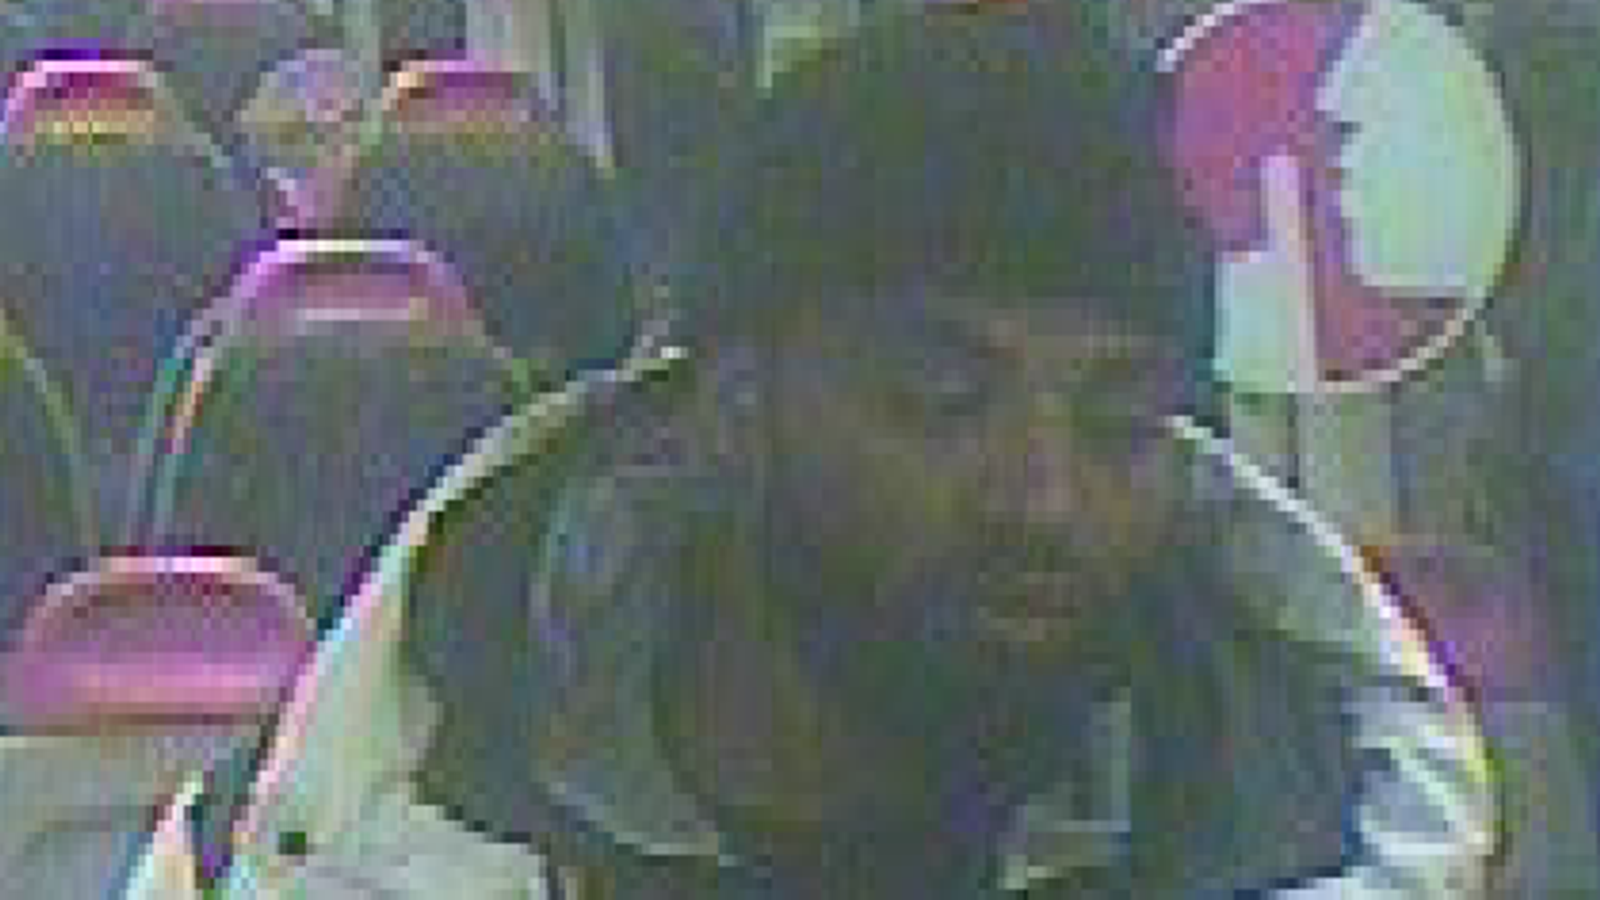 Police release CCTV image of man they want to speak to after girl raped on train